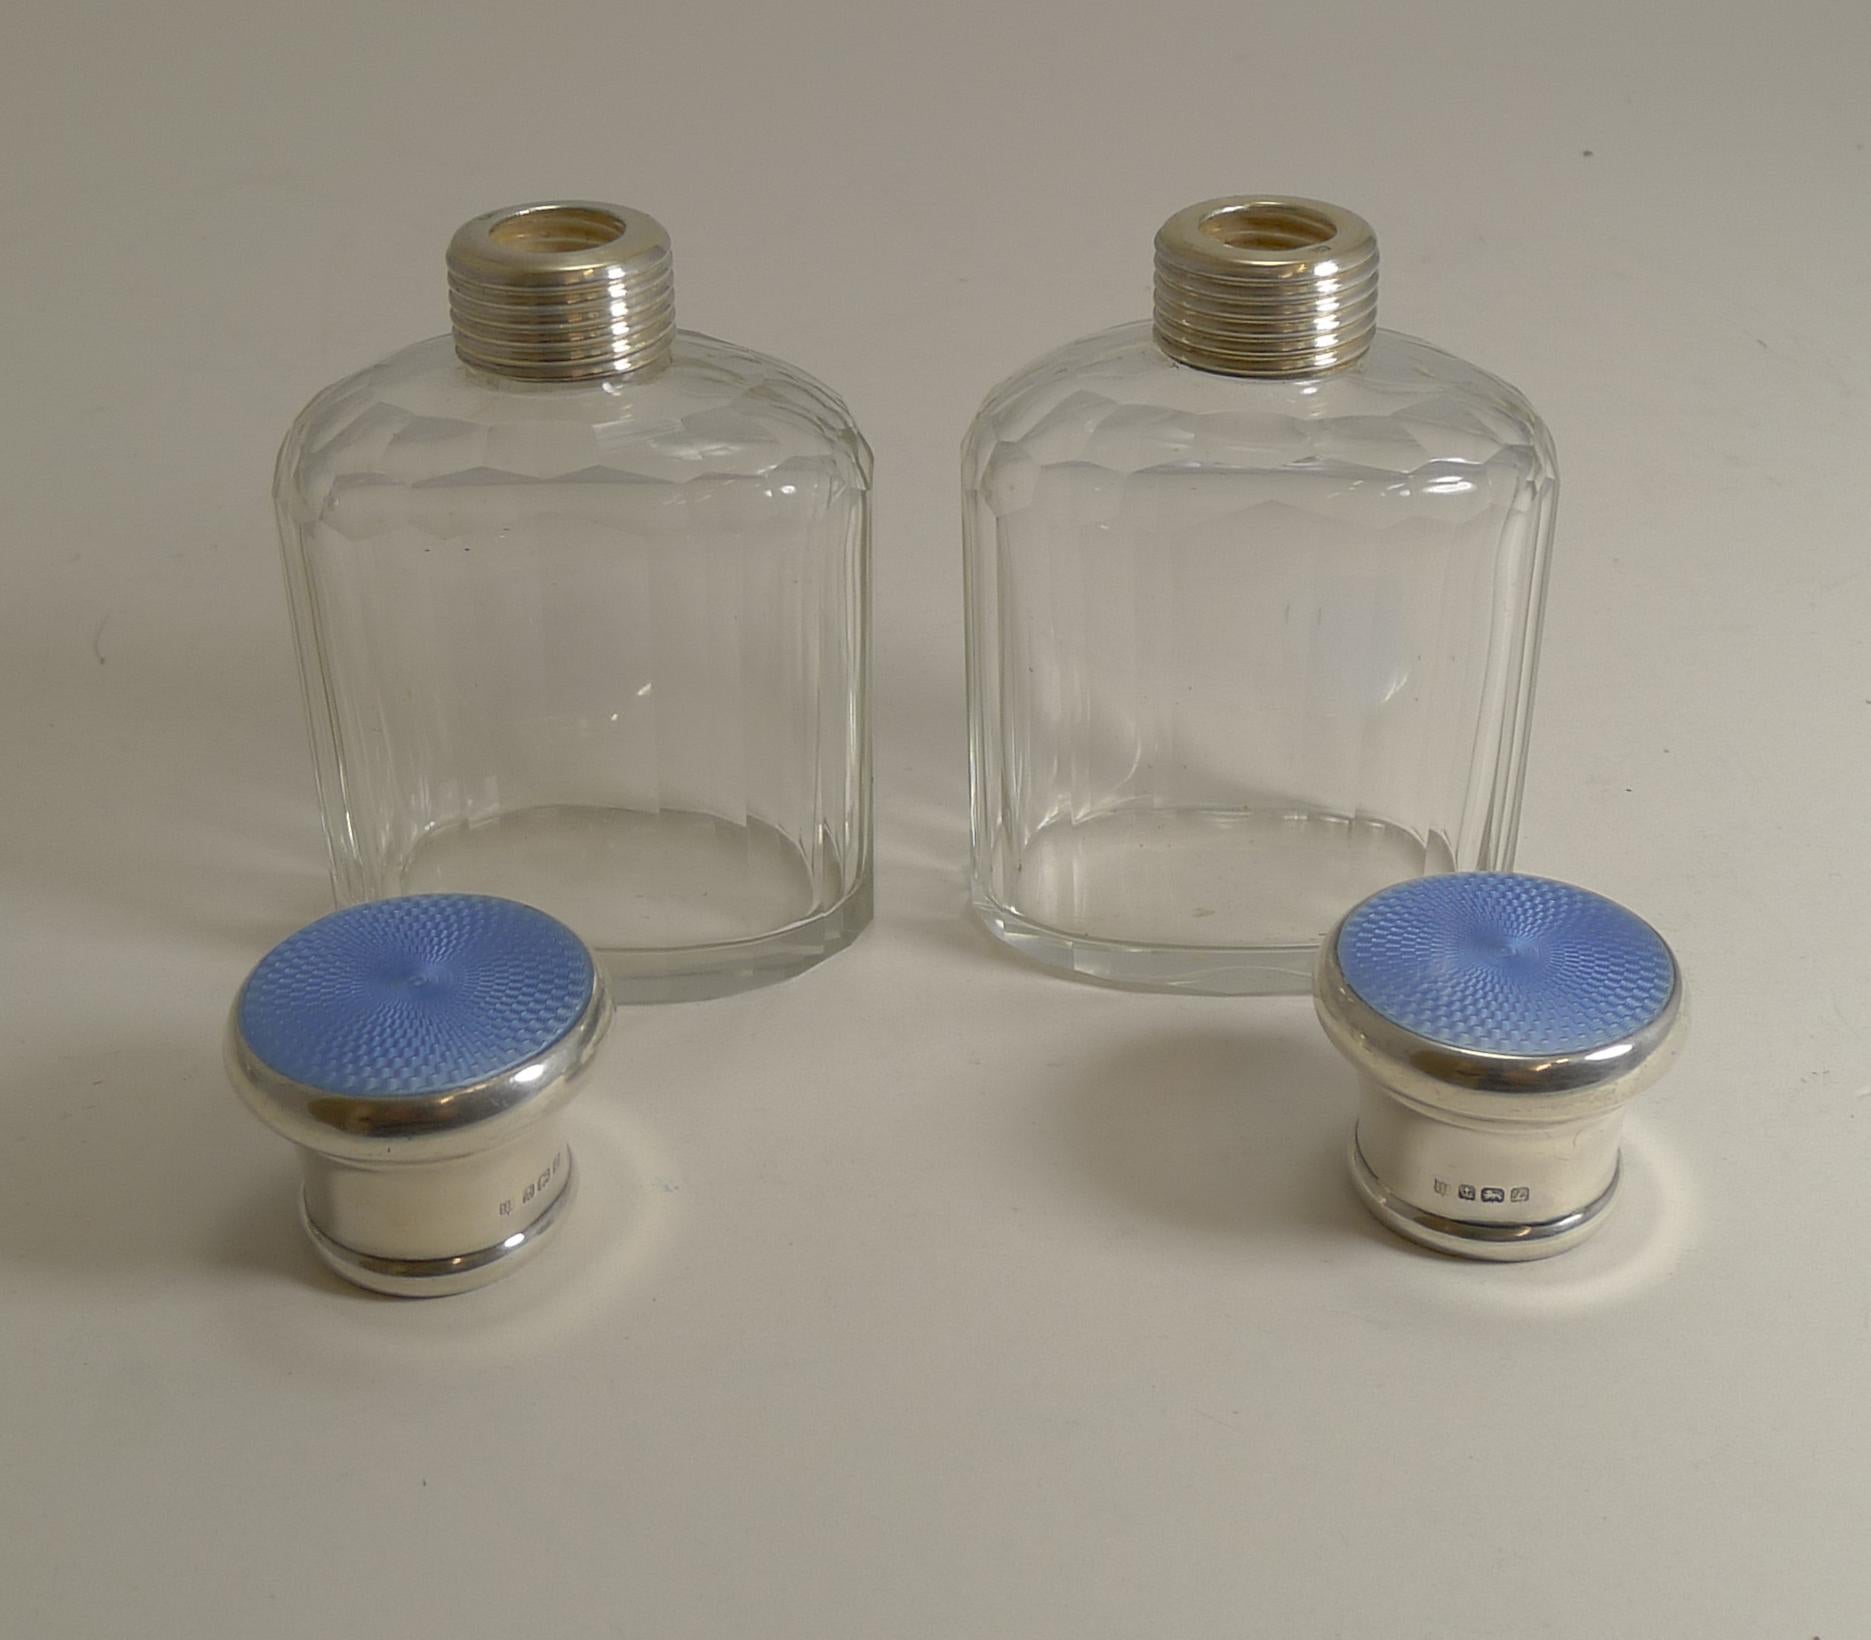 Pair of Vintage Sterling Silver and Guilloche Enamel Cologne / Scent Bottles In Good Condition For Sale In Bath, GB